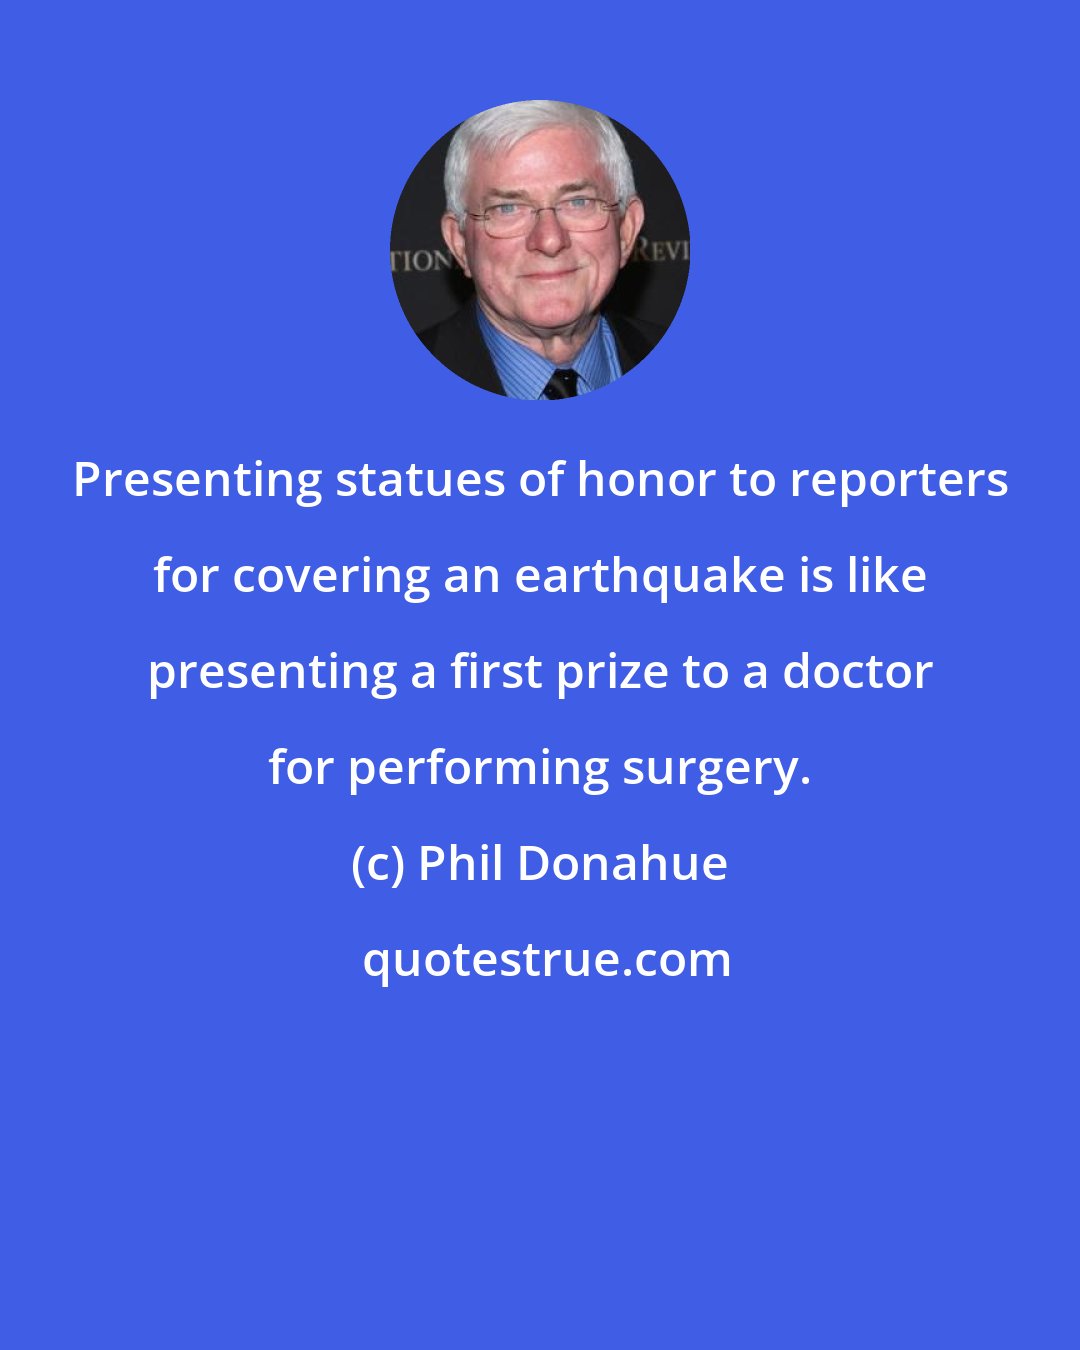 Phil Donahue: Presenting statues of honor to reporters for covering an earthquake is like presenting a first prize to a doctor for performing surgery.